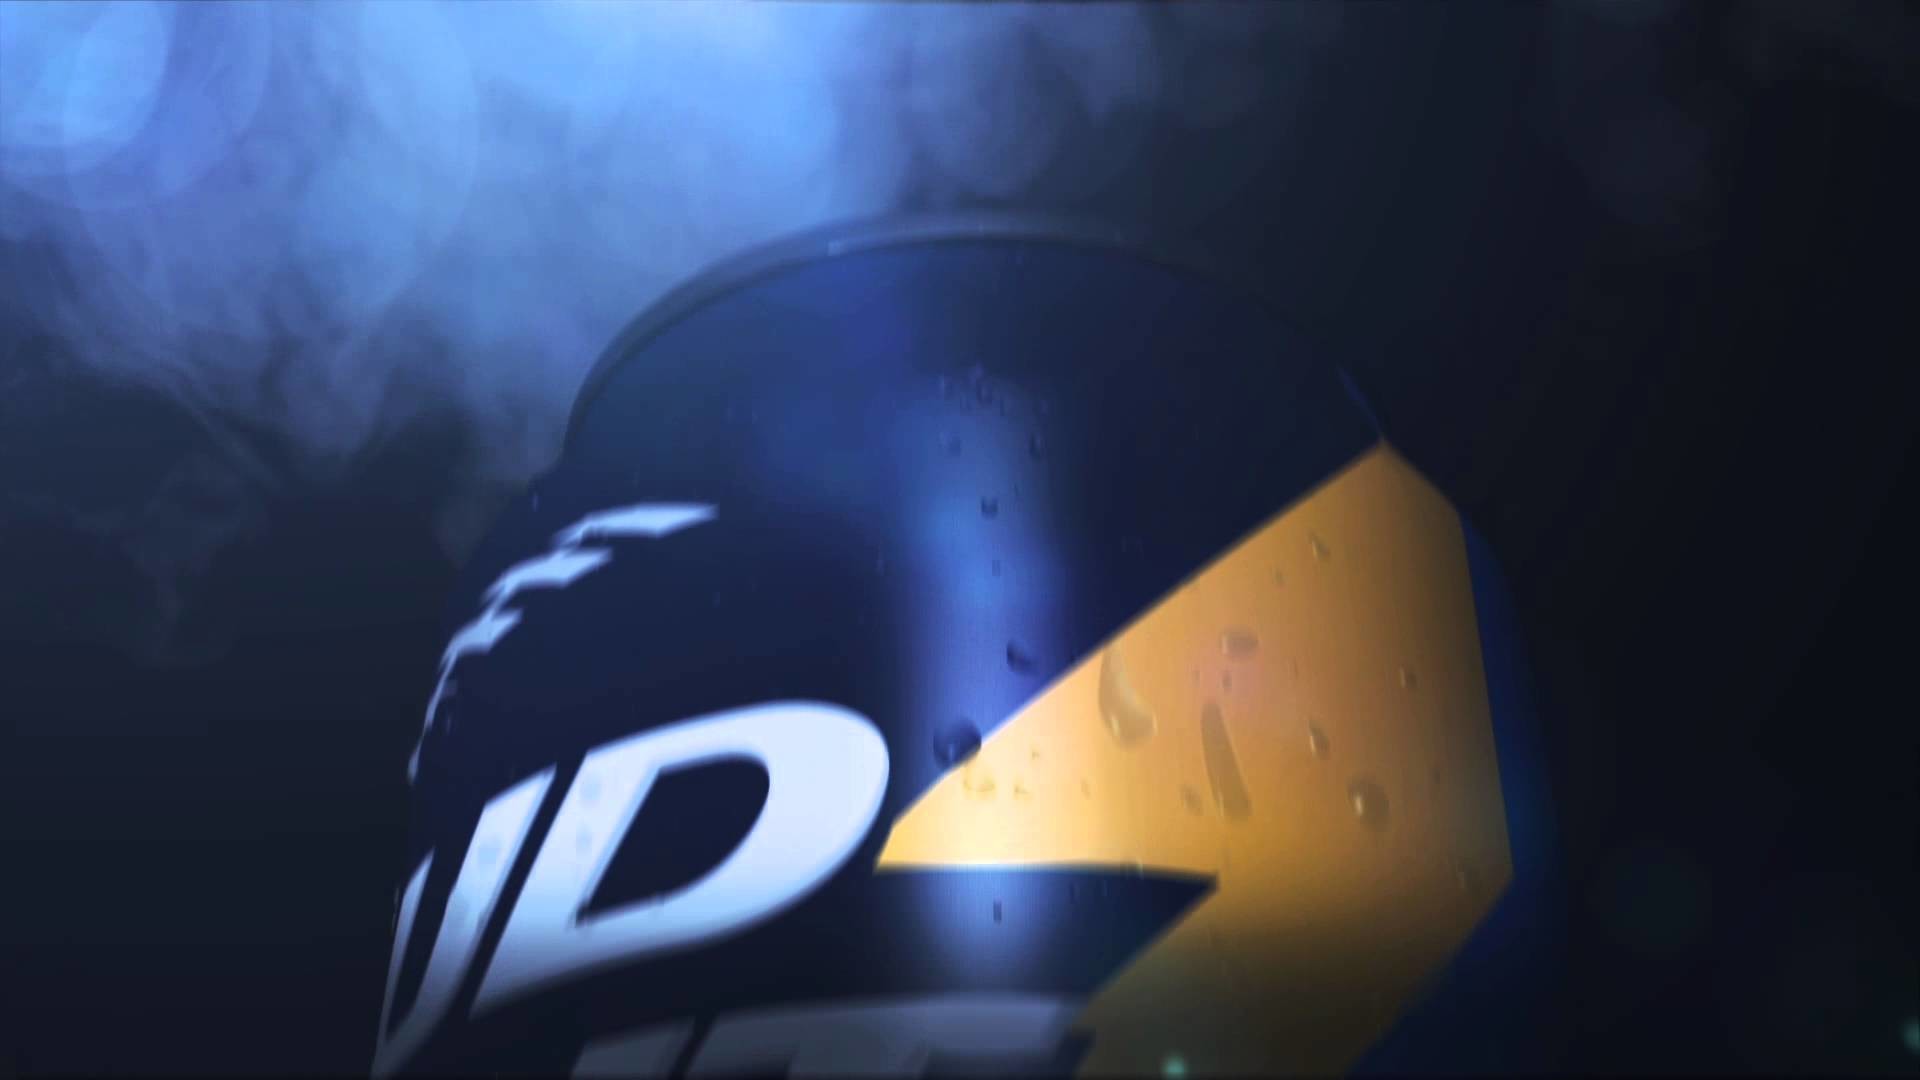 1920x1080 Bud Light Chargers #MyTeamCan - San Diego Chargers